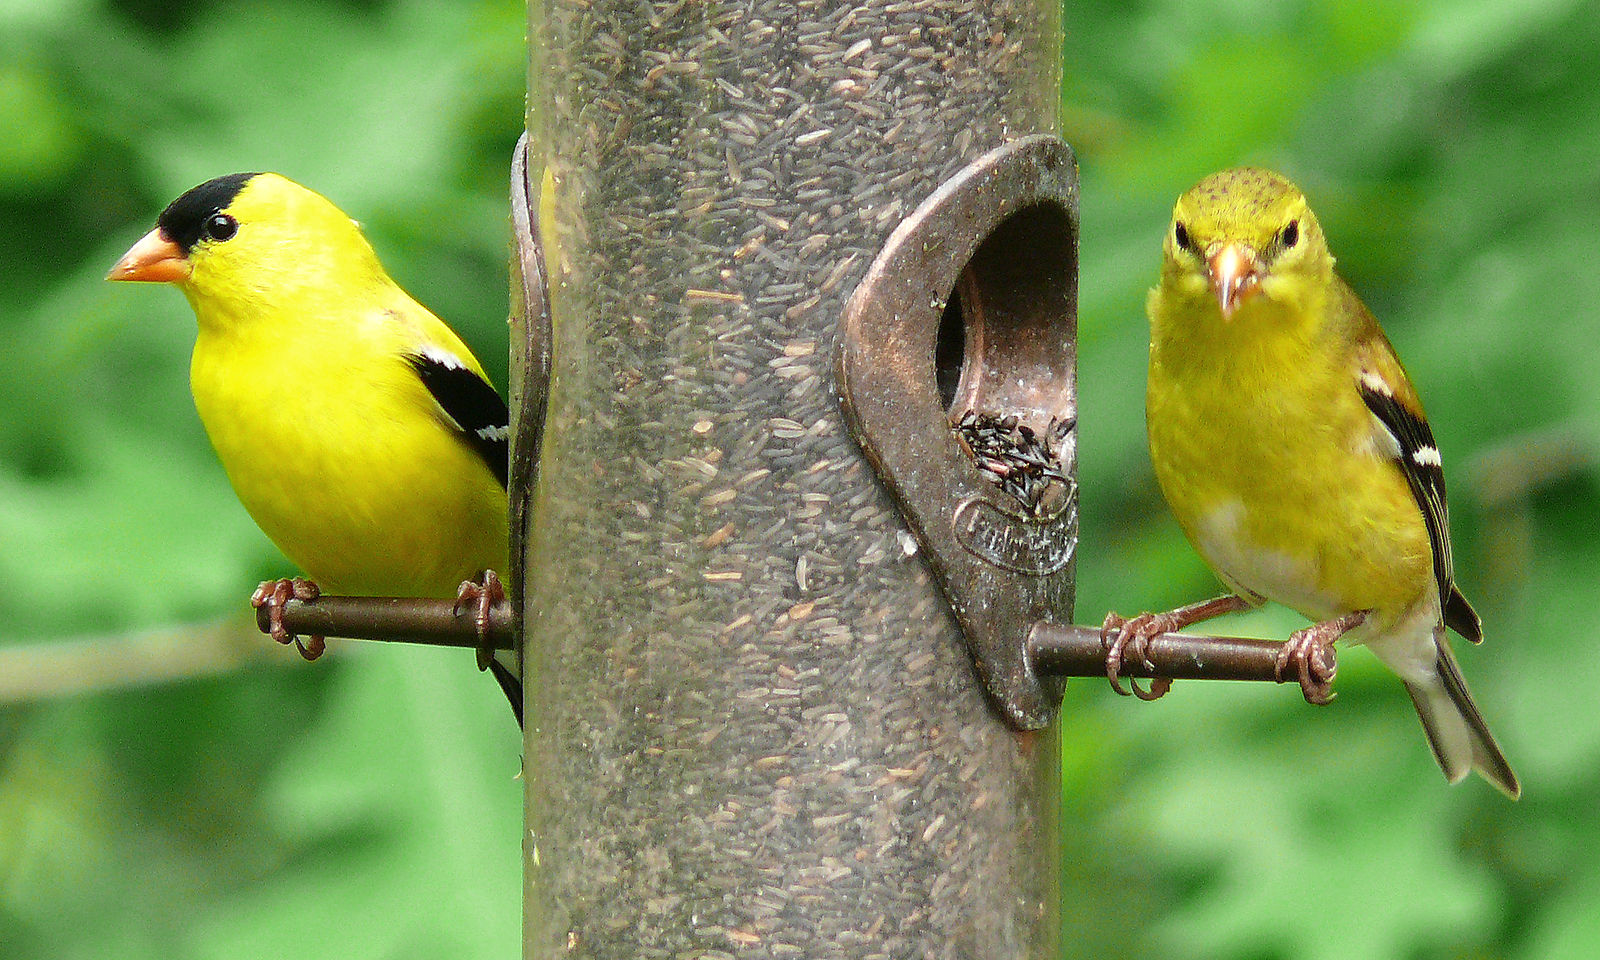 Male (left) and female (right) American Goldfinches (Carduelis tristis) at a thistle feeder.